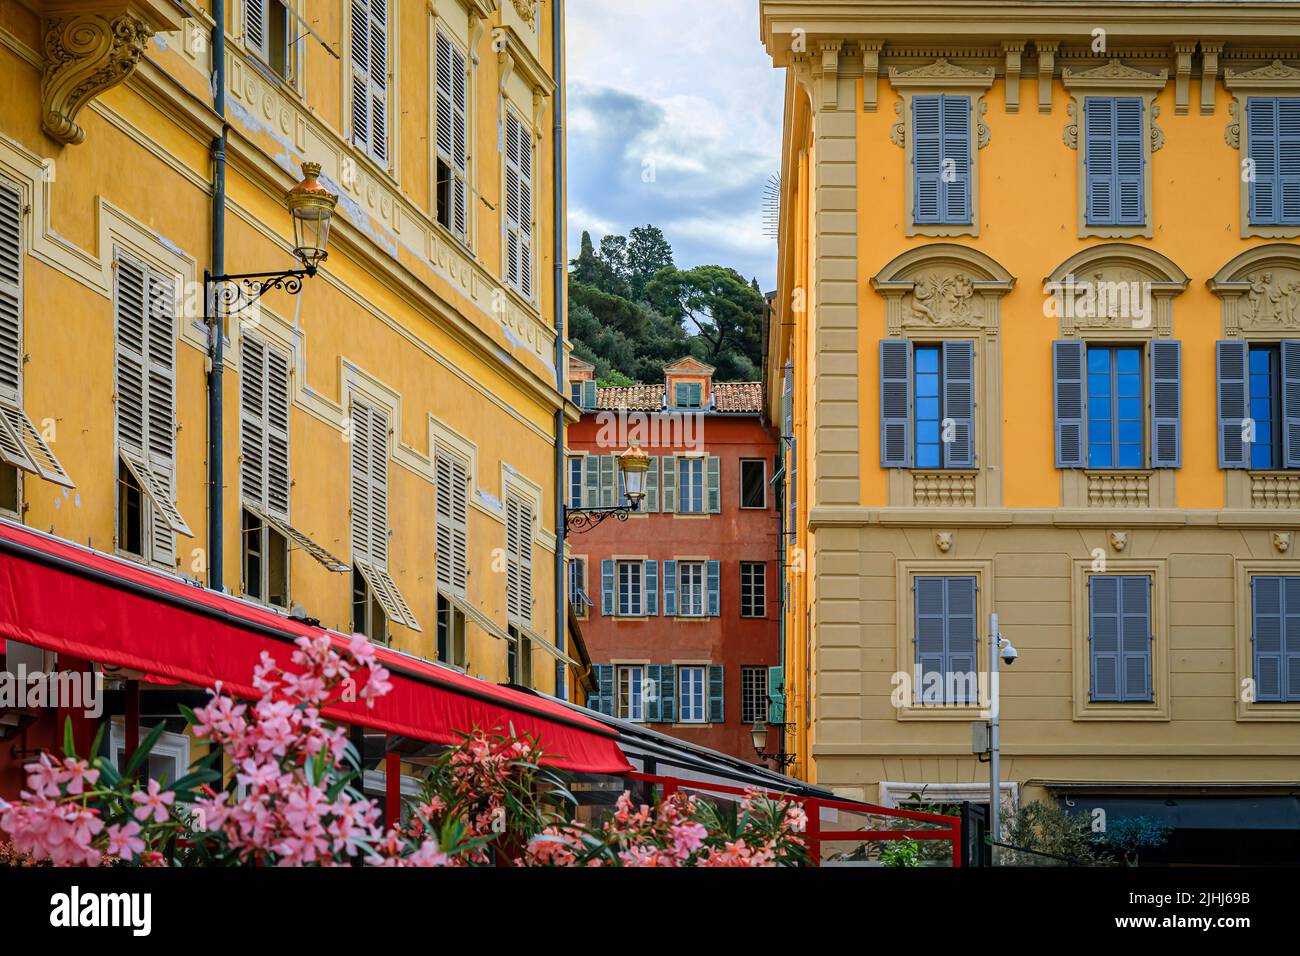 Mediterranean house facades with traditional shutters near the local outdoor farmers market Cours Saleya in the Old Town Vieille Ville, Nice, France Stock Photo